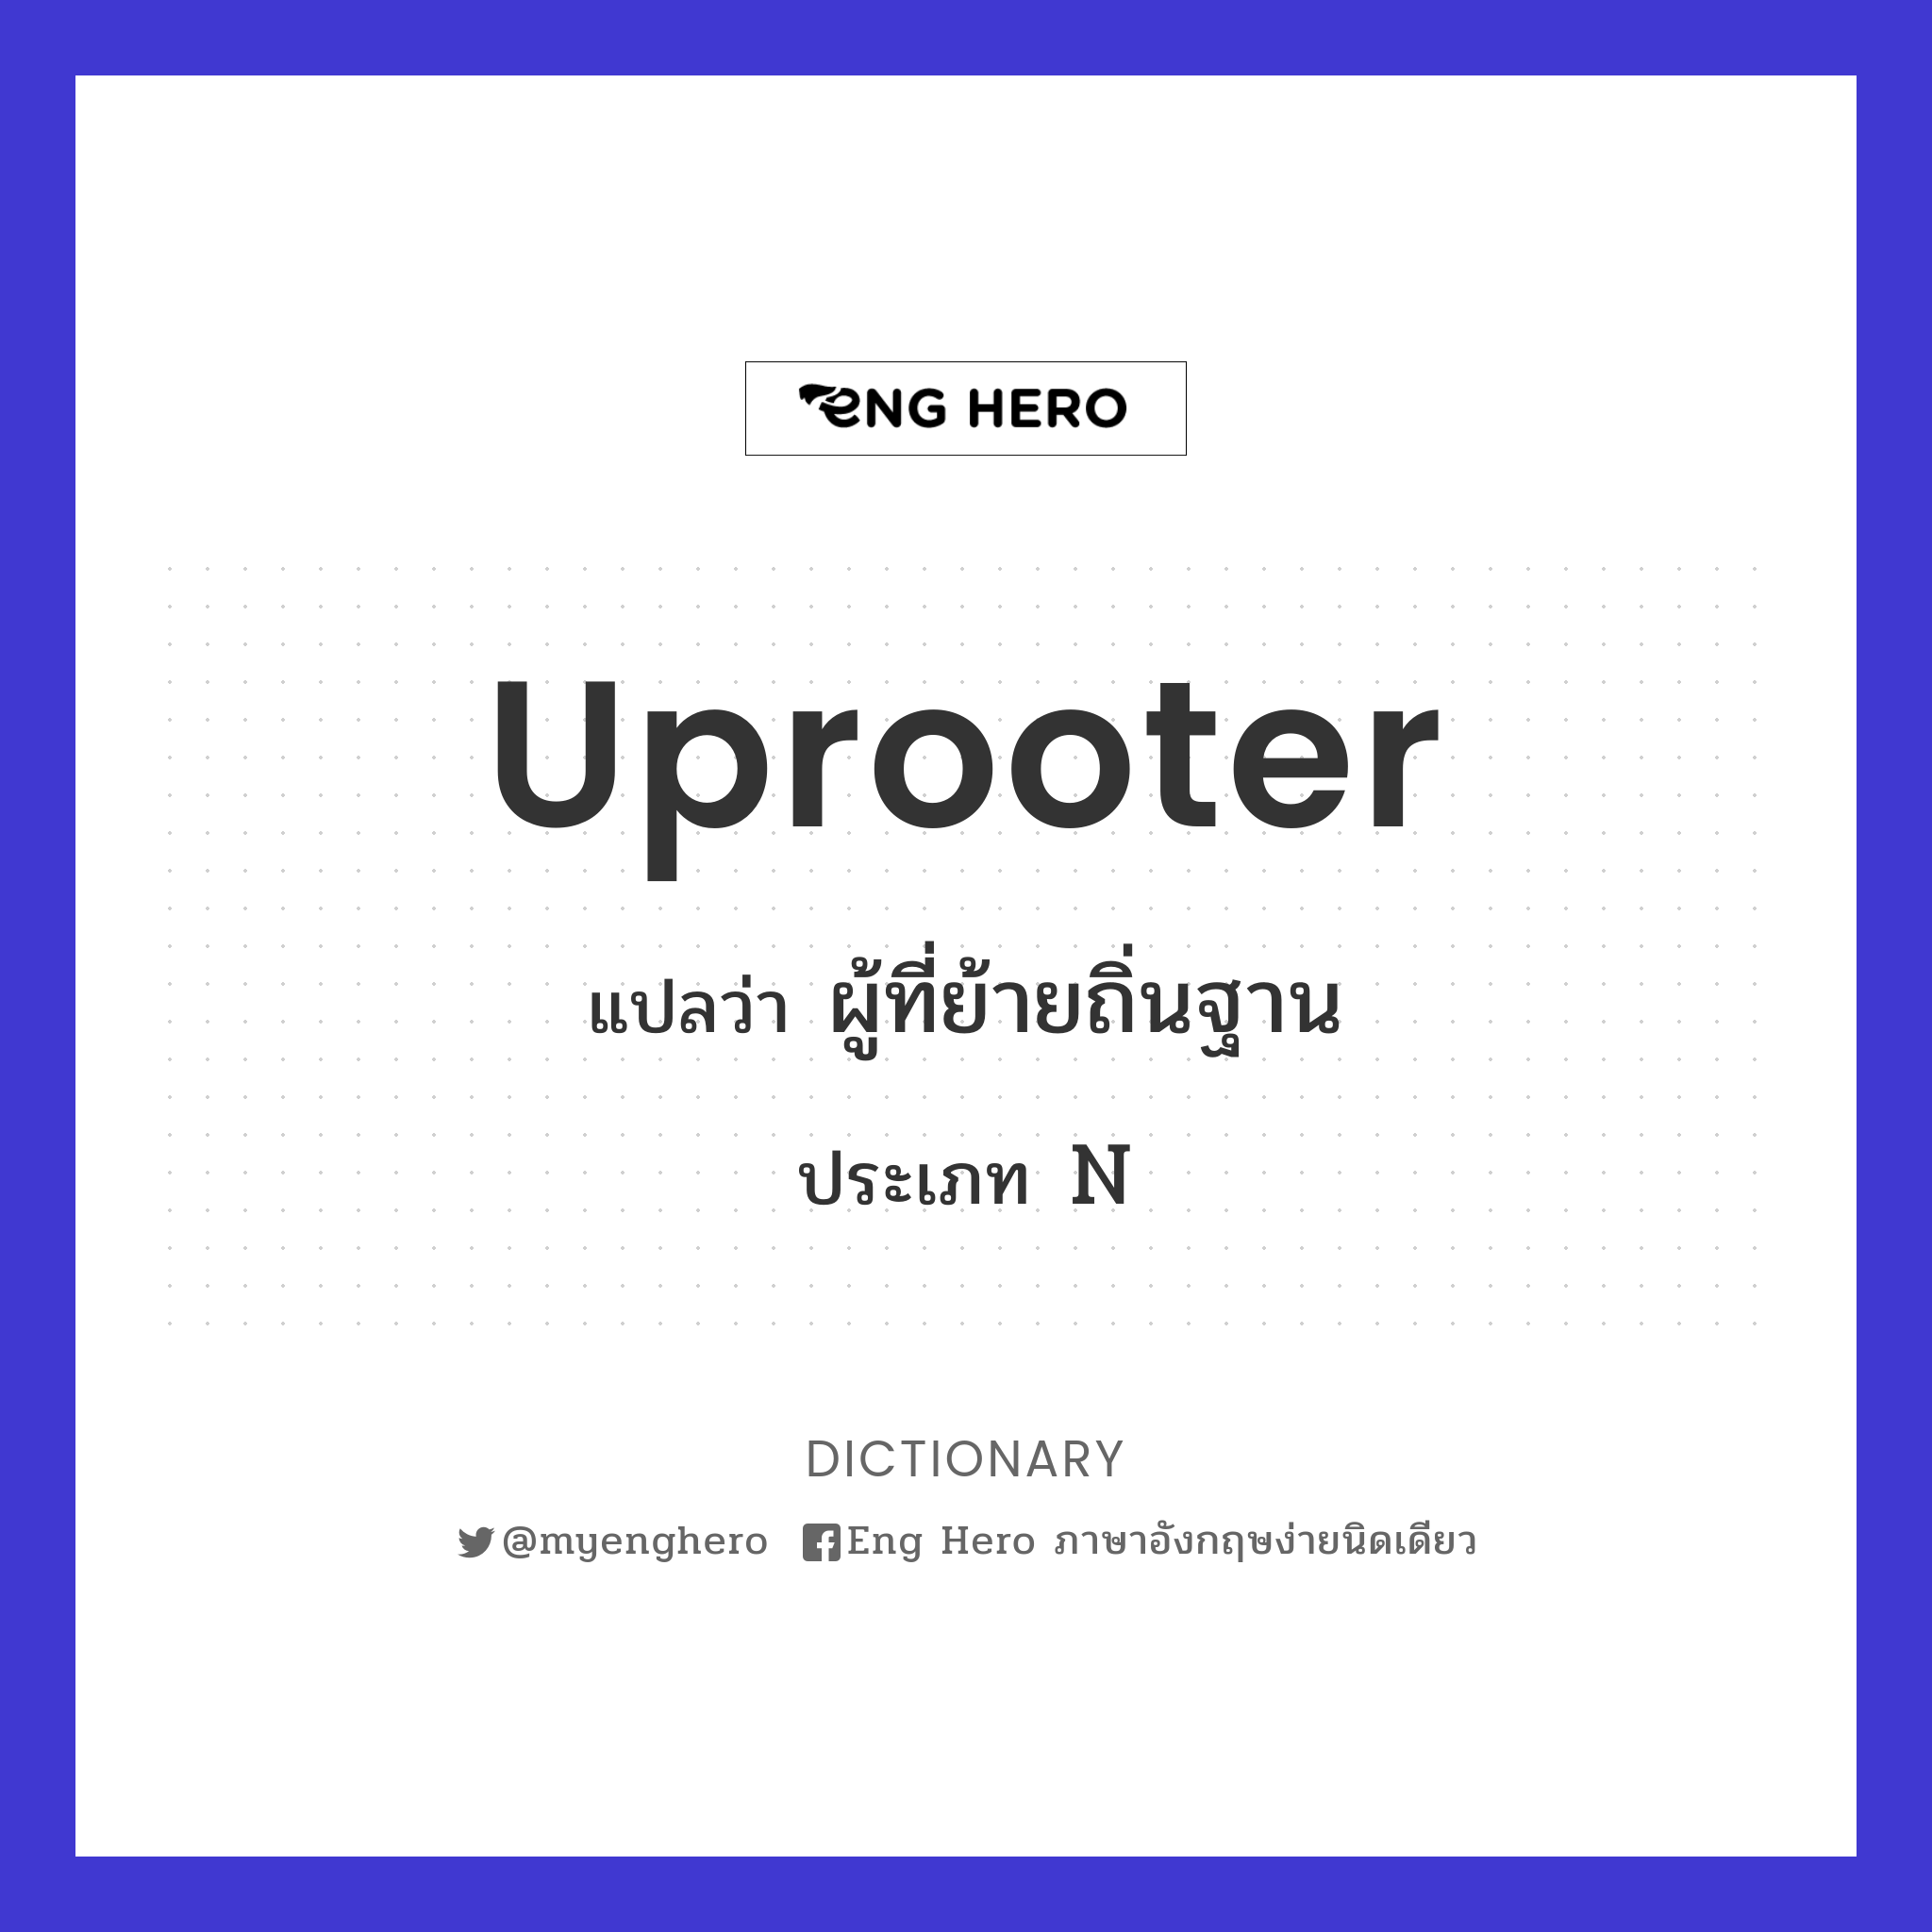 uprooter